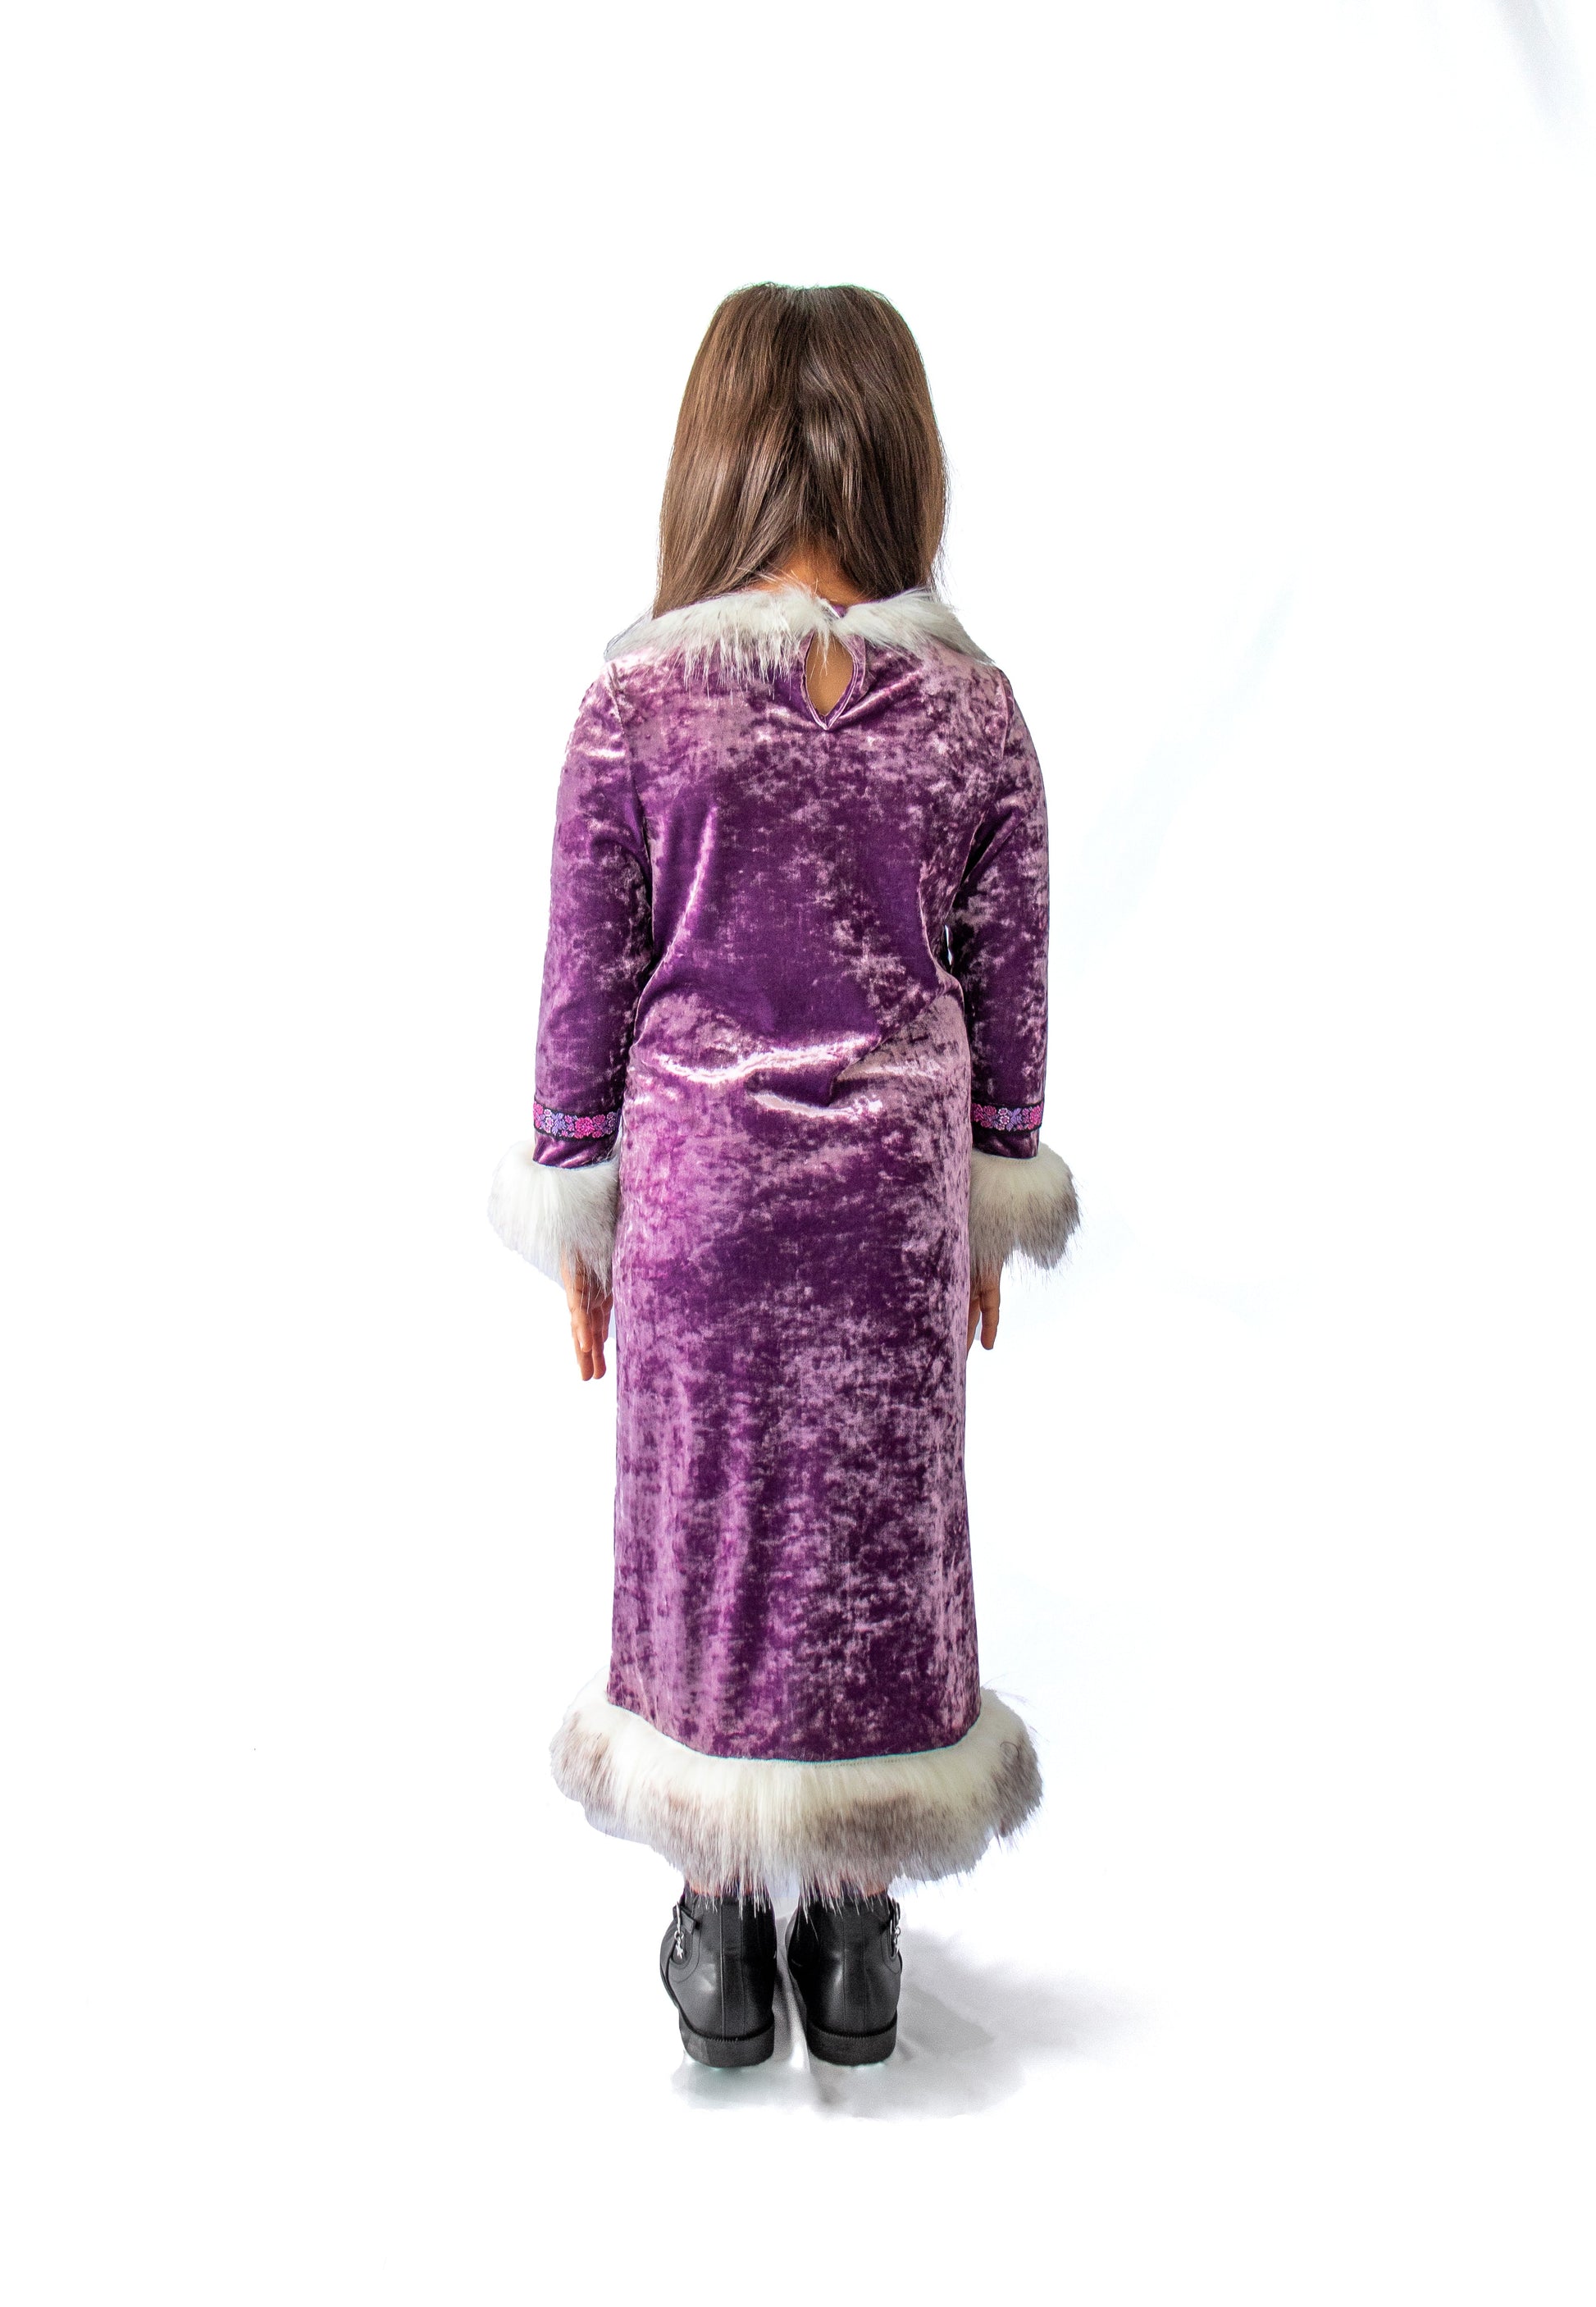 The Kid's Princess Dress Lavender is closed with a button at the back of the neck, ankles long